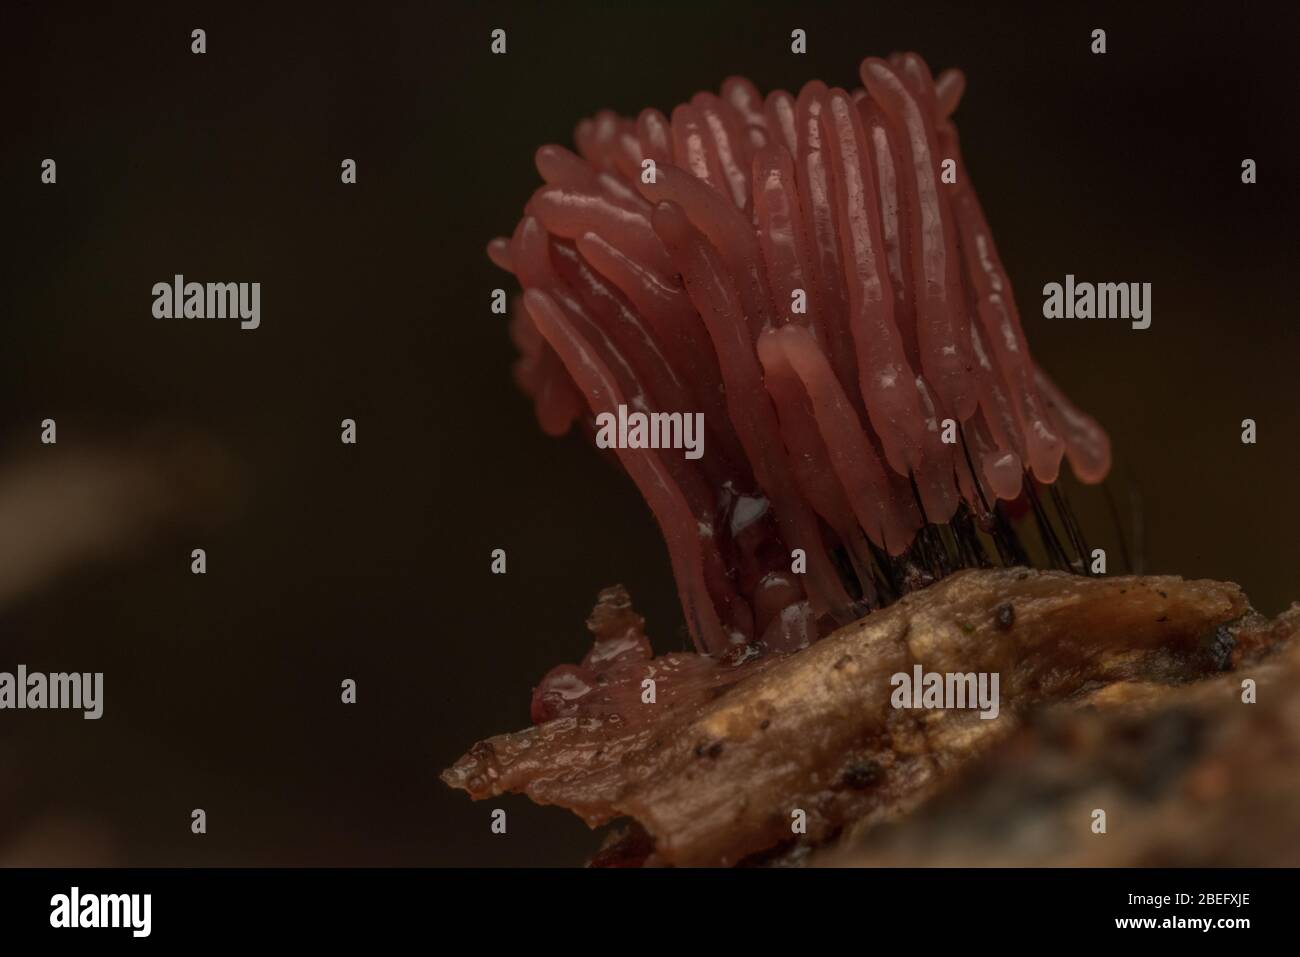 A slime mold in the genus Stemonitis growing on a rotting log in the East Bay region of California. Stock Photo